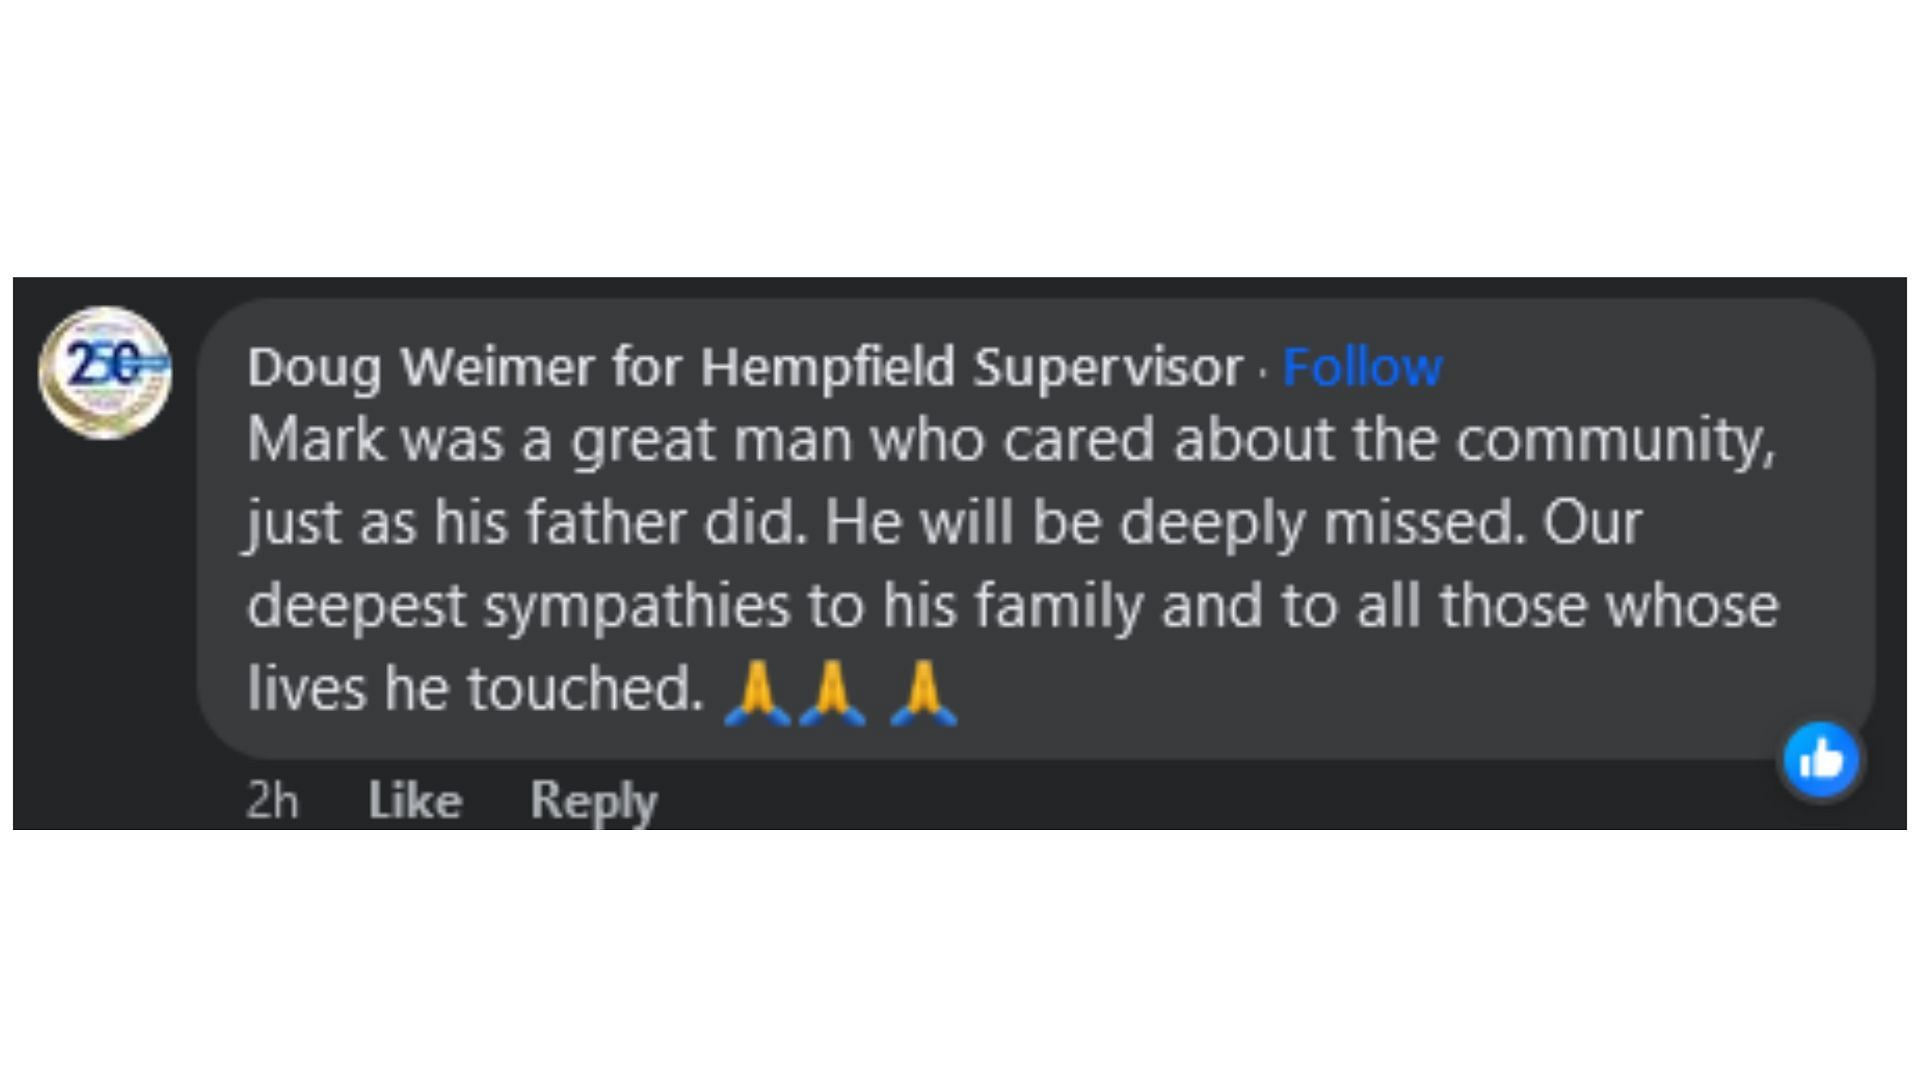 Netizens poured tribute as Smail died (Image via Facebook / Doug Weimer for Hempfield Supervisor)